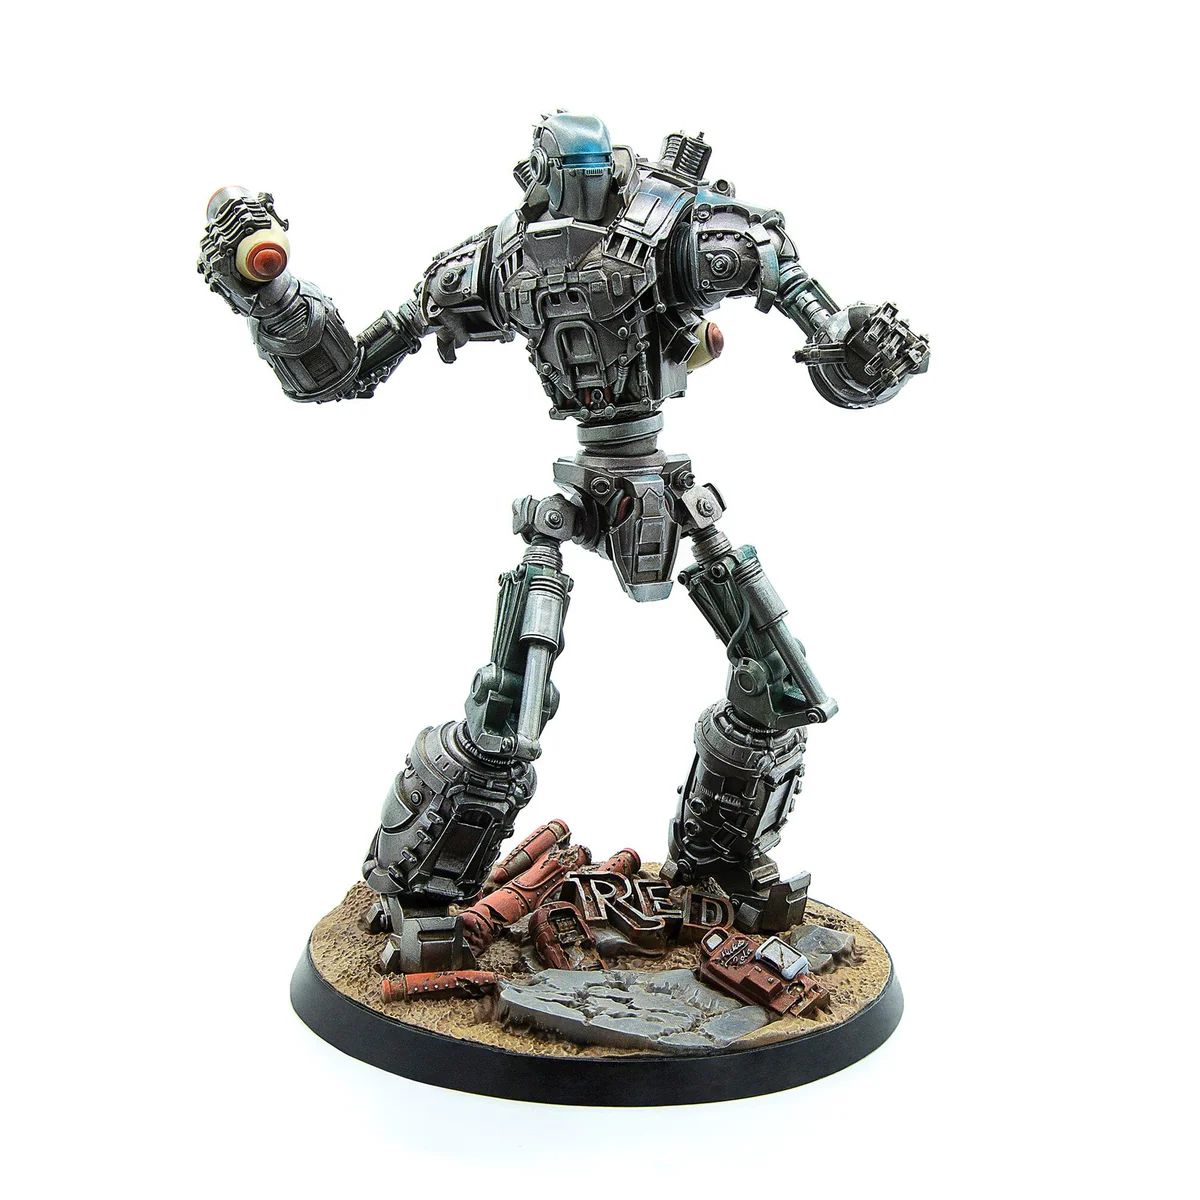 Liberty Prime is ✨BACK ONLINE✨ on our 🇬🇧 site! Grab this highly coveted massive mini while we’ve got em! buff.ly/3Q5zO6V #fallout #minipainting